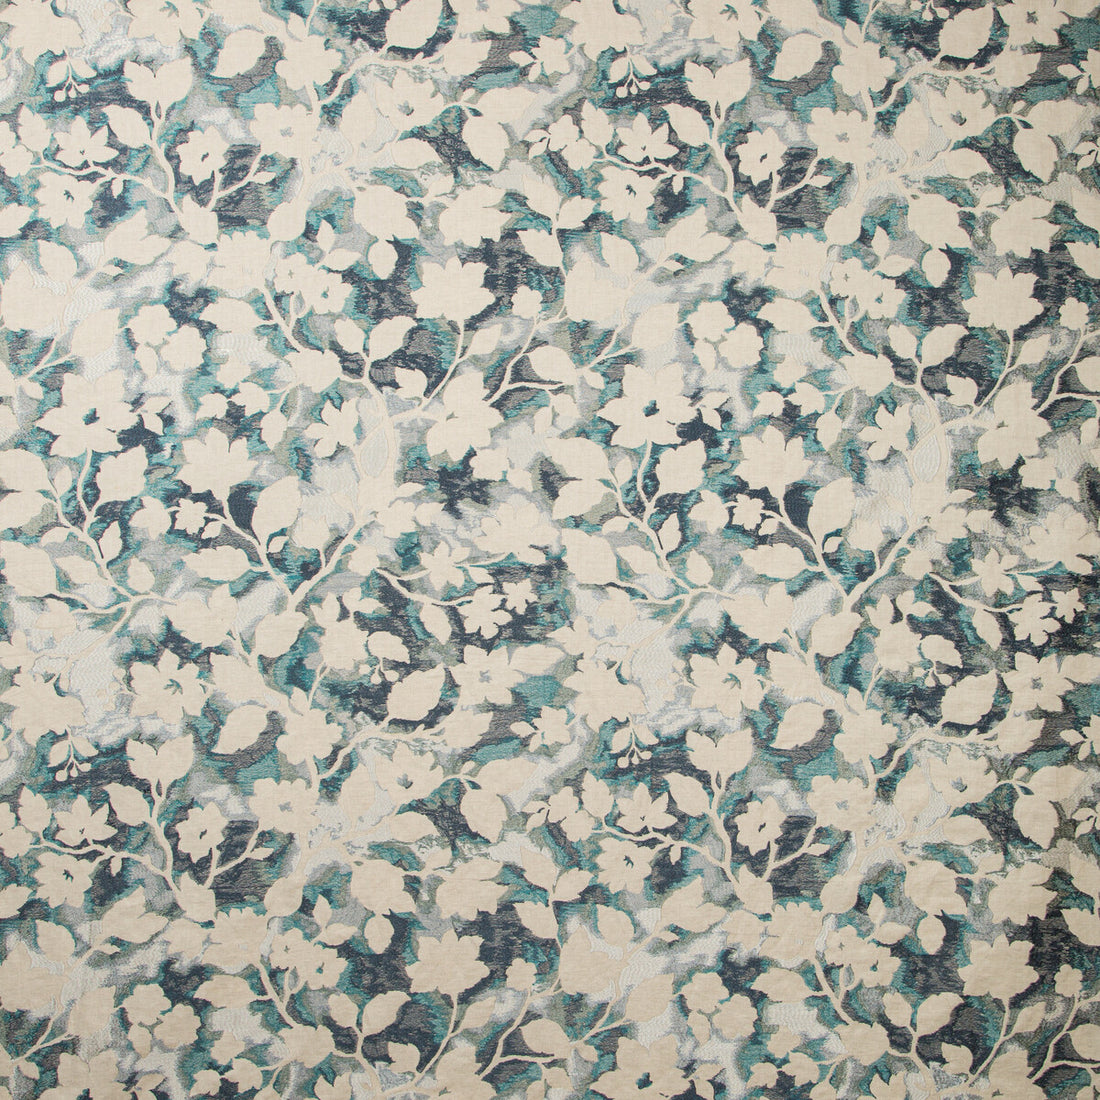 Les Fleurs fabric in teal color - pattern 35554.35.0 - by Kravet Couture in the Modern Colors-Sojourn Collection collection